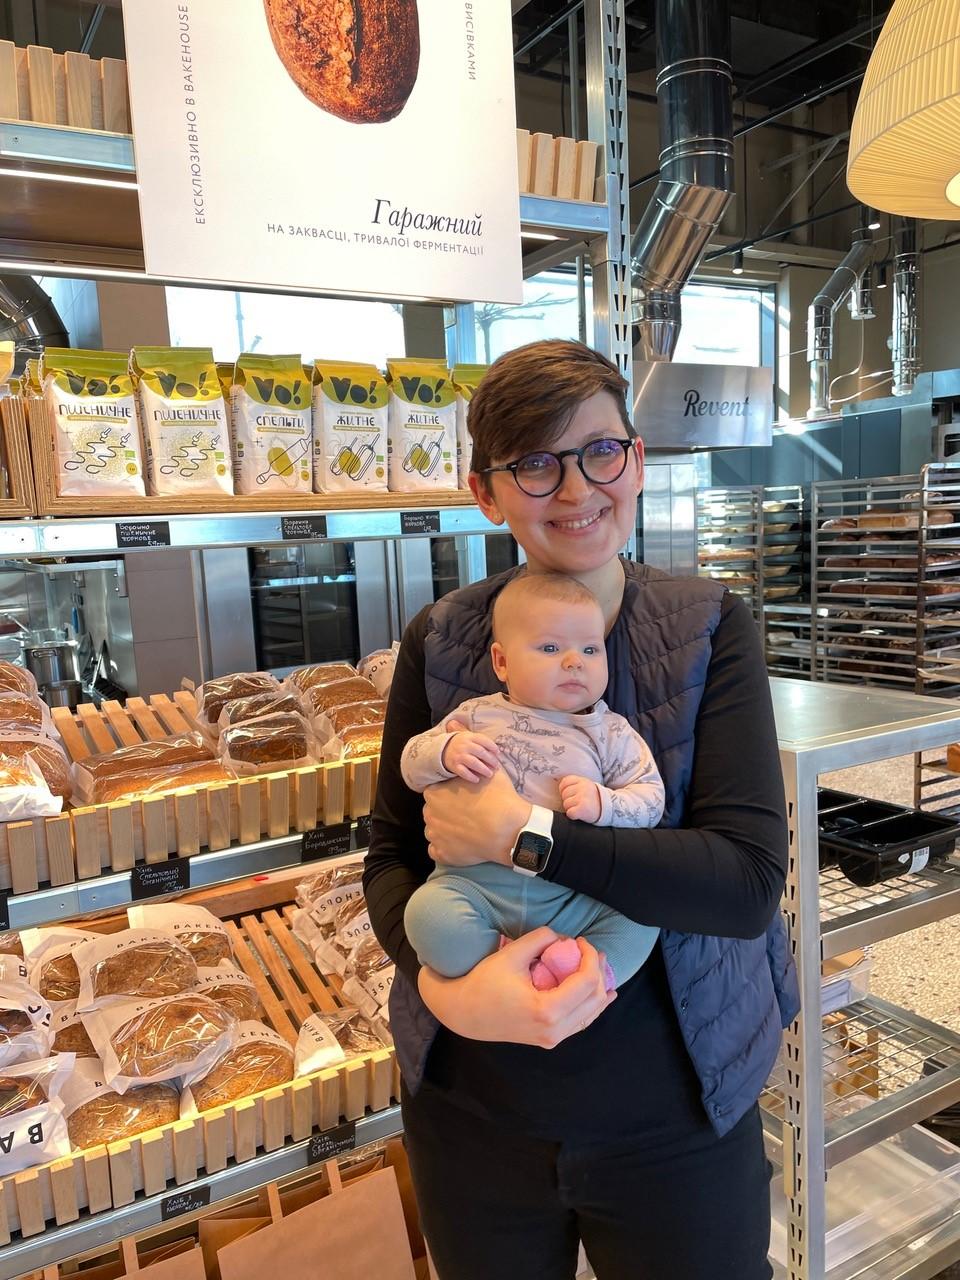 Anna Makievska and her infant daughter stand in front of rows of pastries in Bakehouse two days before the invasion, Kyiv, Ukraine, February 22, 2022 